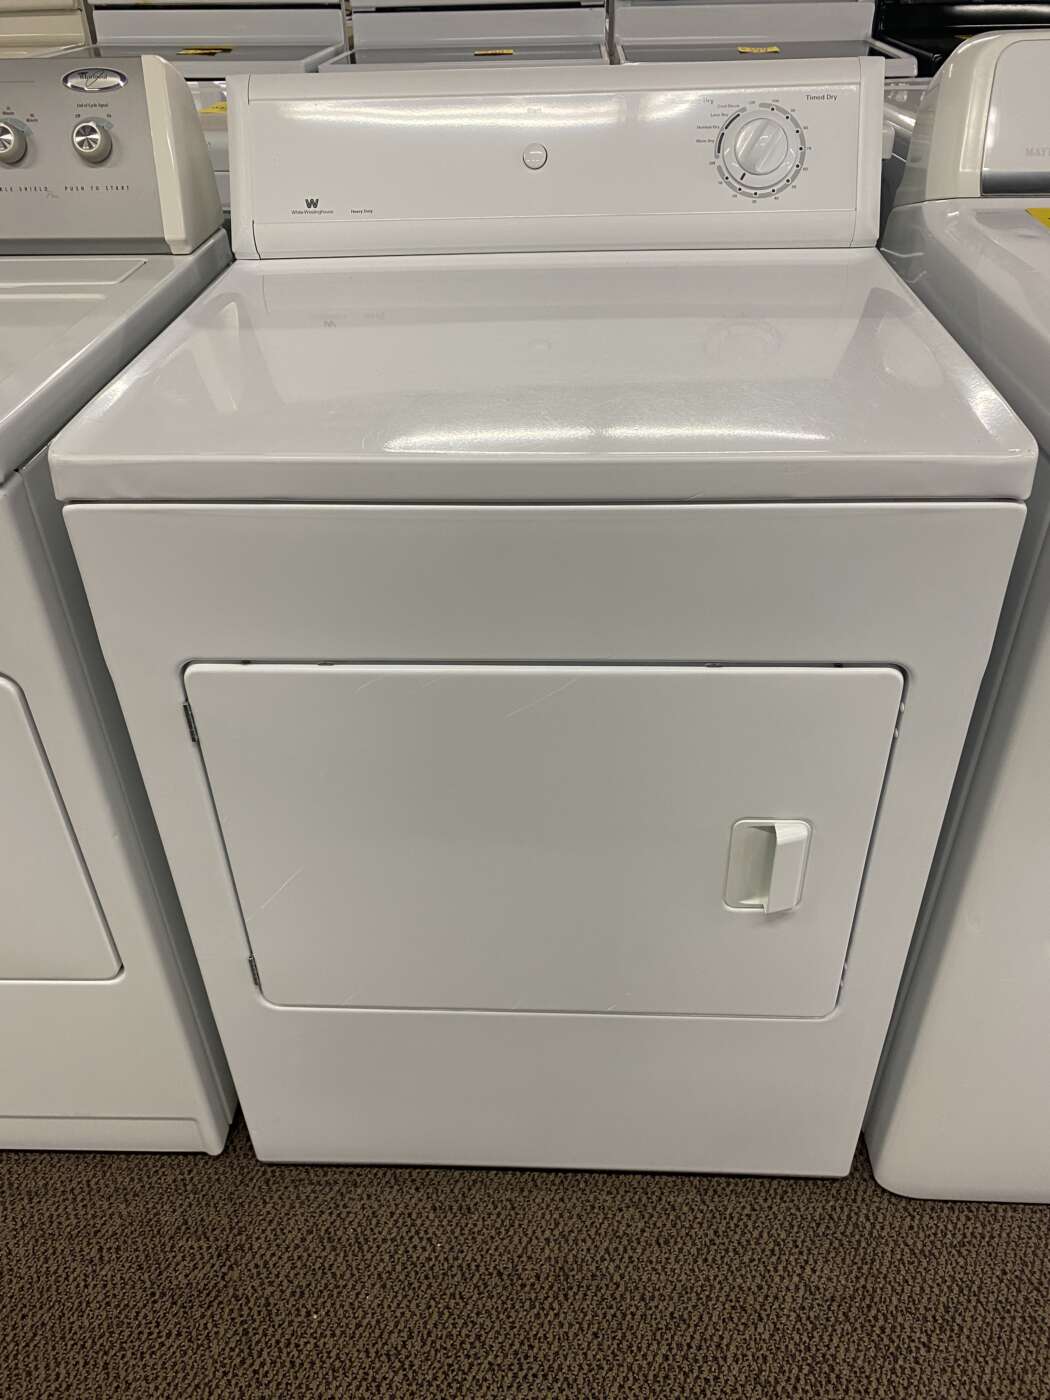 Reconditioned WESTINGHOUSE Electric Dryer